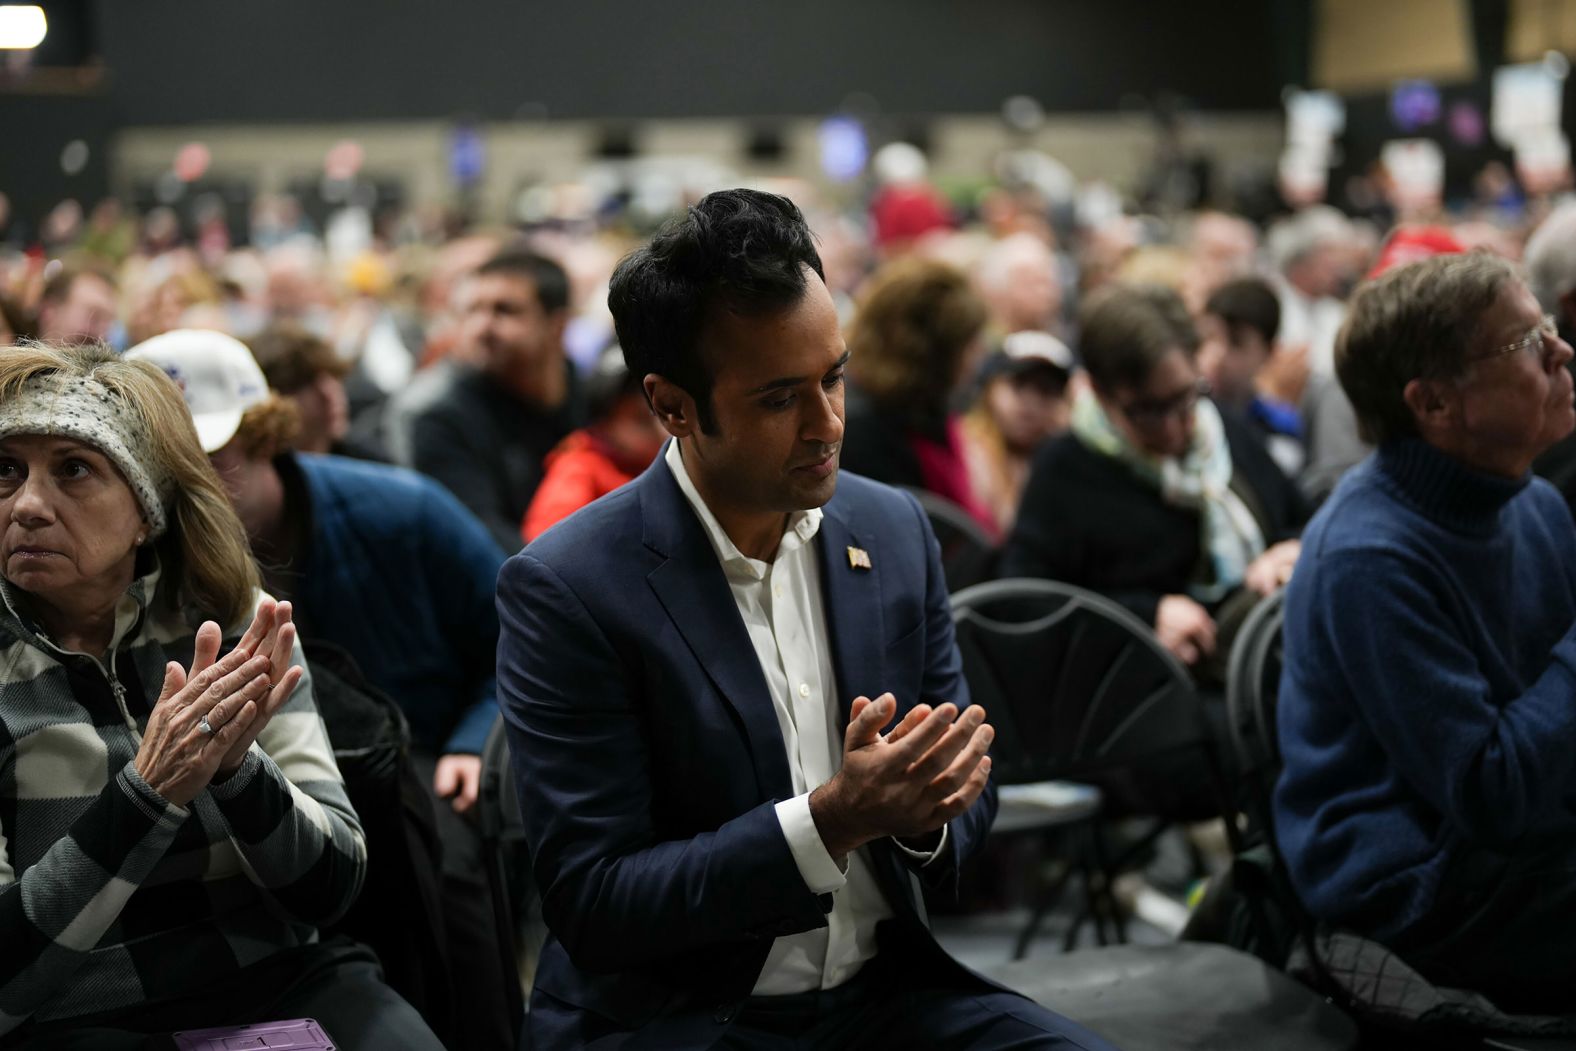 Ramaswamy claps as former President Donald Trump speaks to caucusgoers in Clive, Iowa, in January 2024. Ramaswamy suspended his campaign after the Iowa caucuses and endorsed Trump.